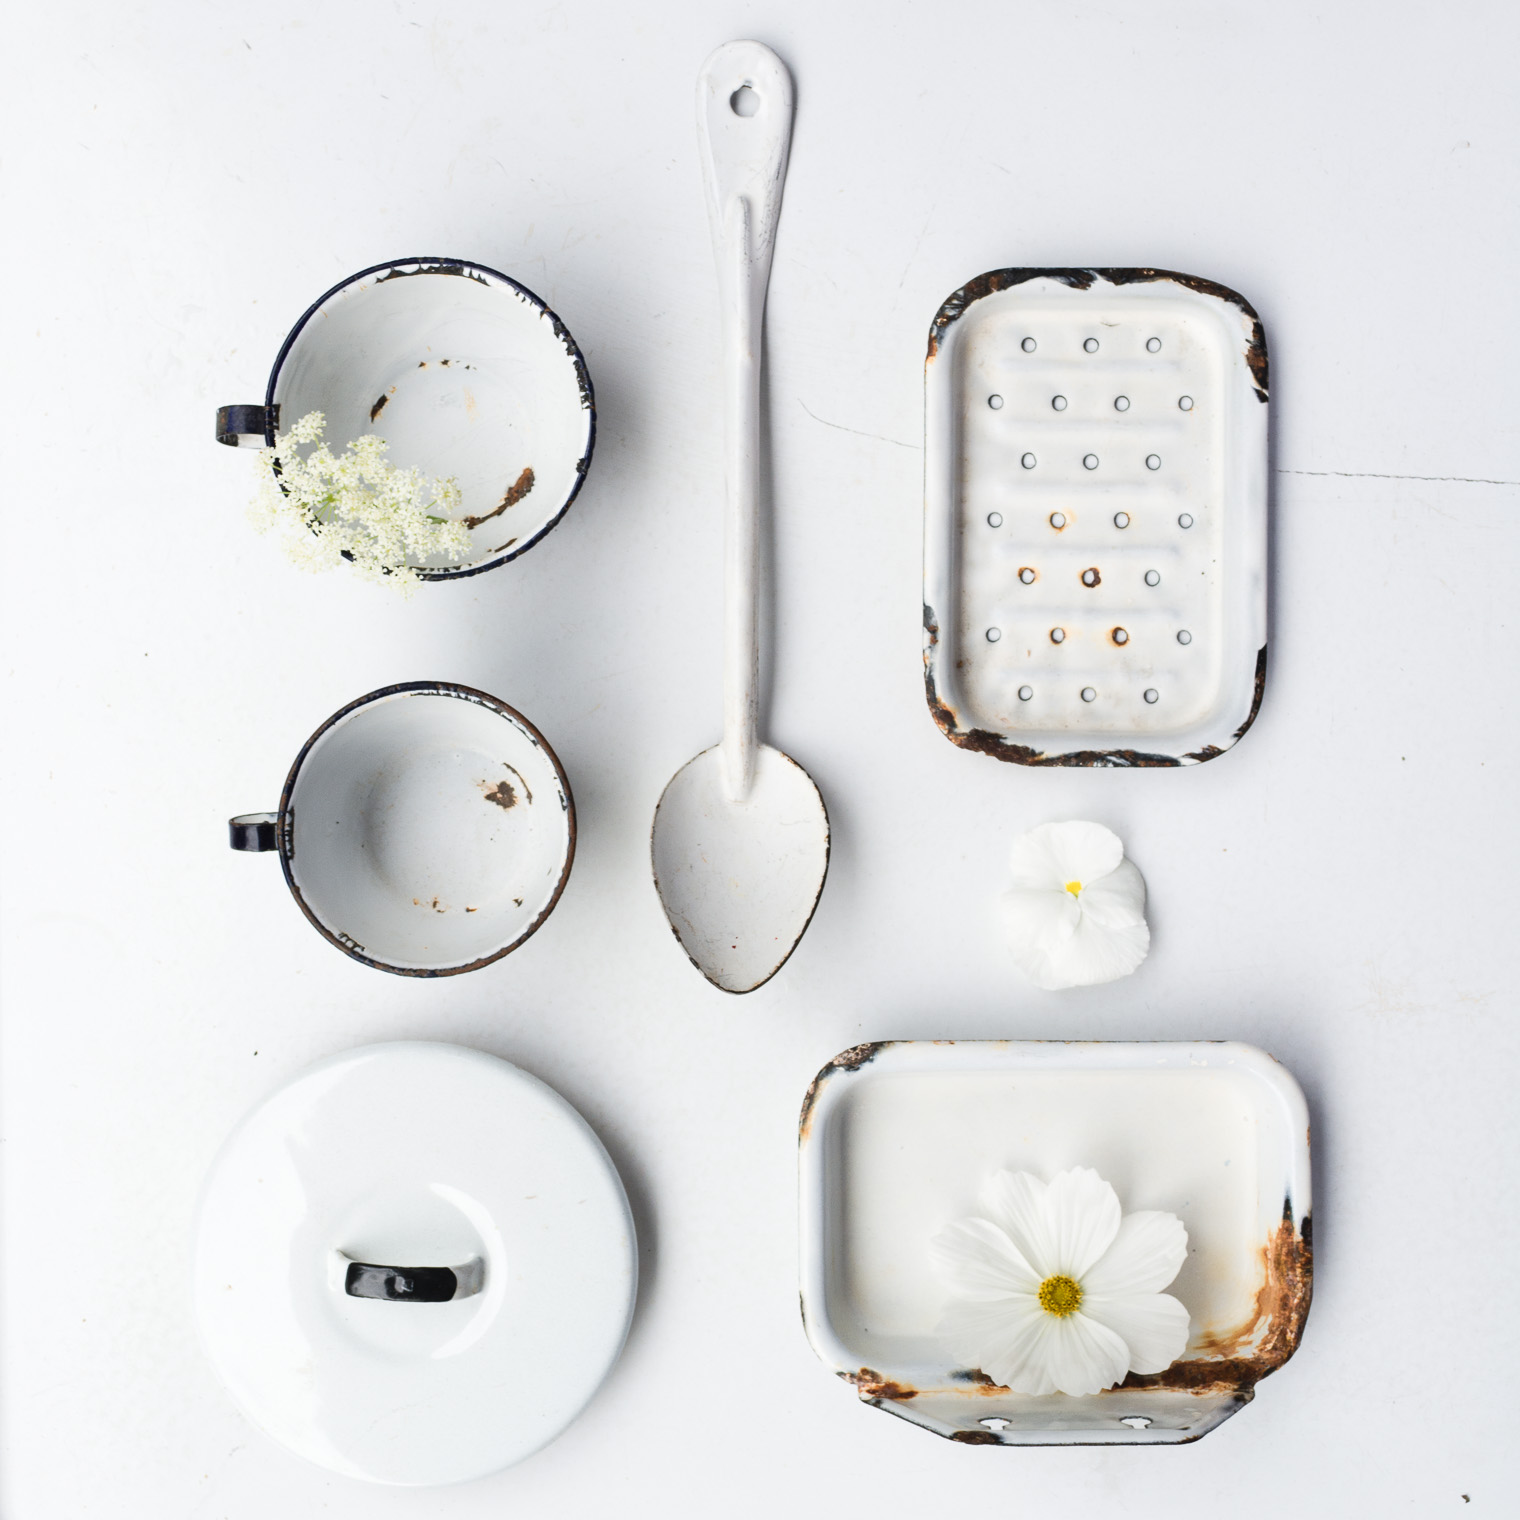 Sunday Sundries, Creative Drive, Keeping With the Times, enamelware